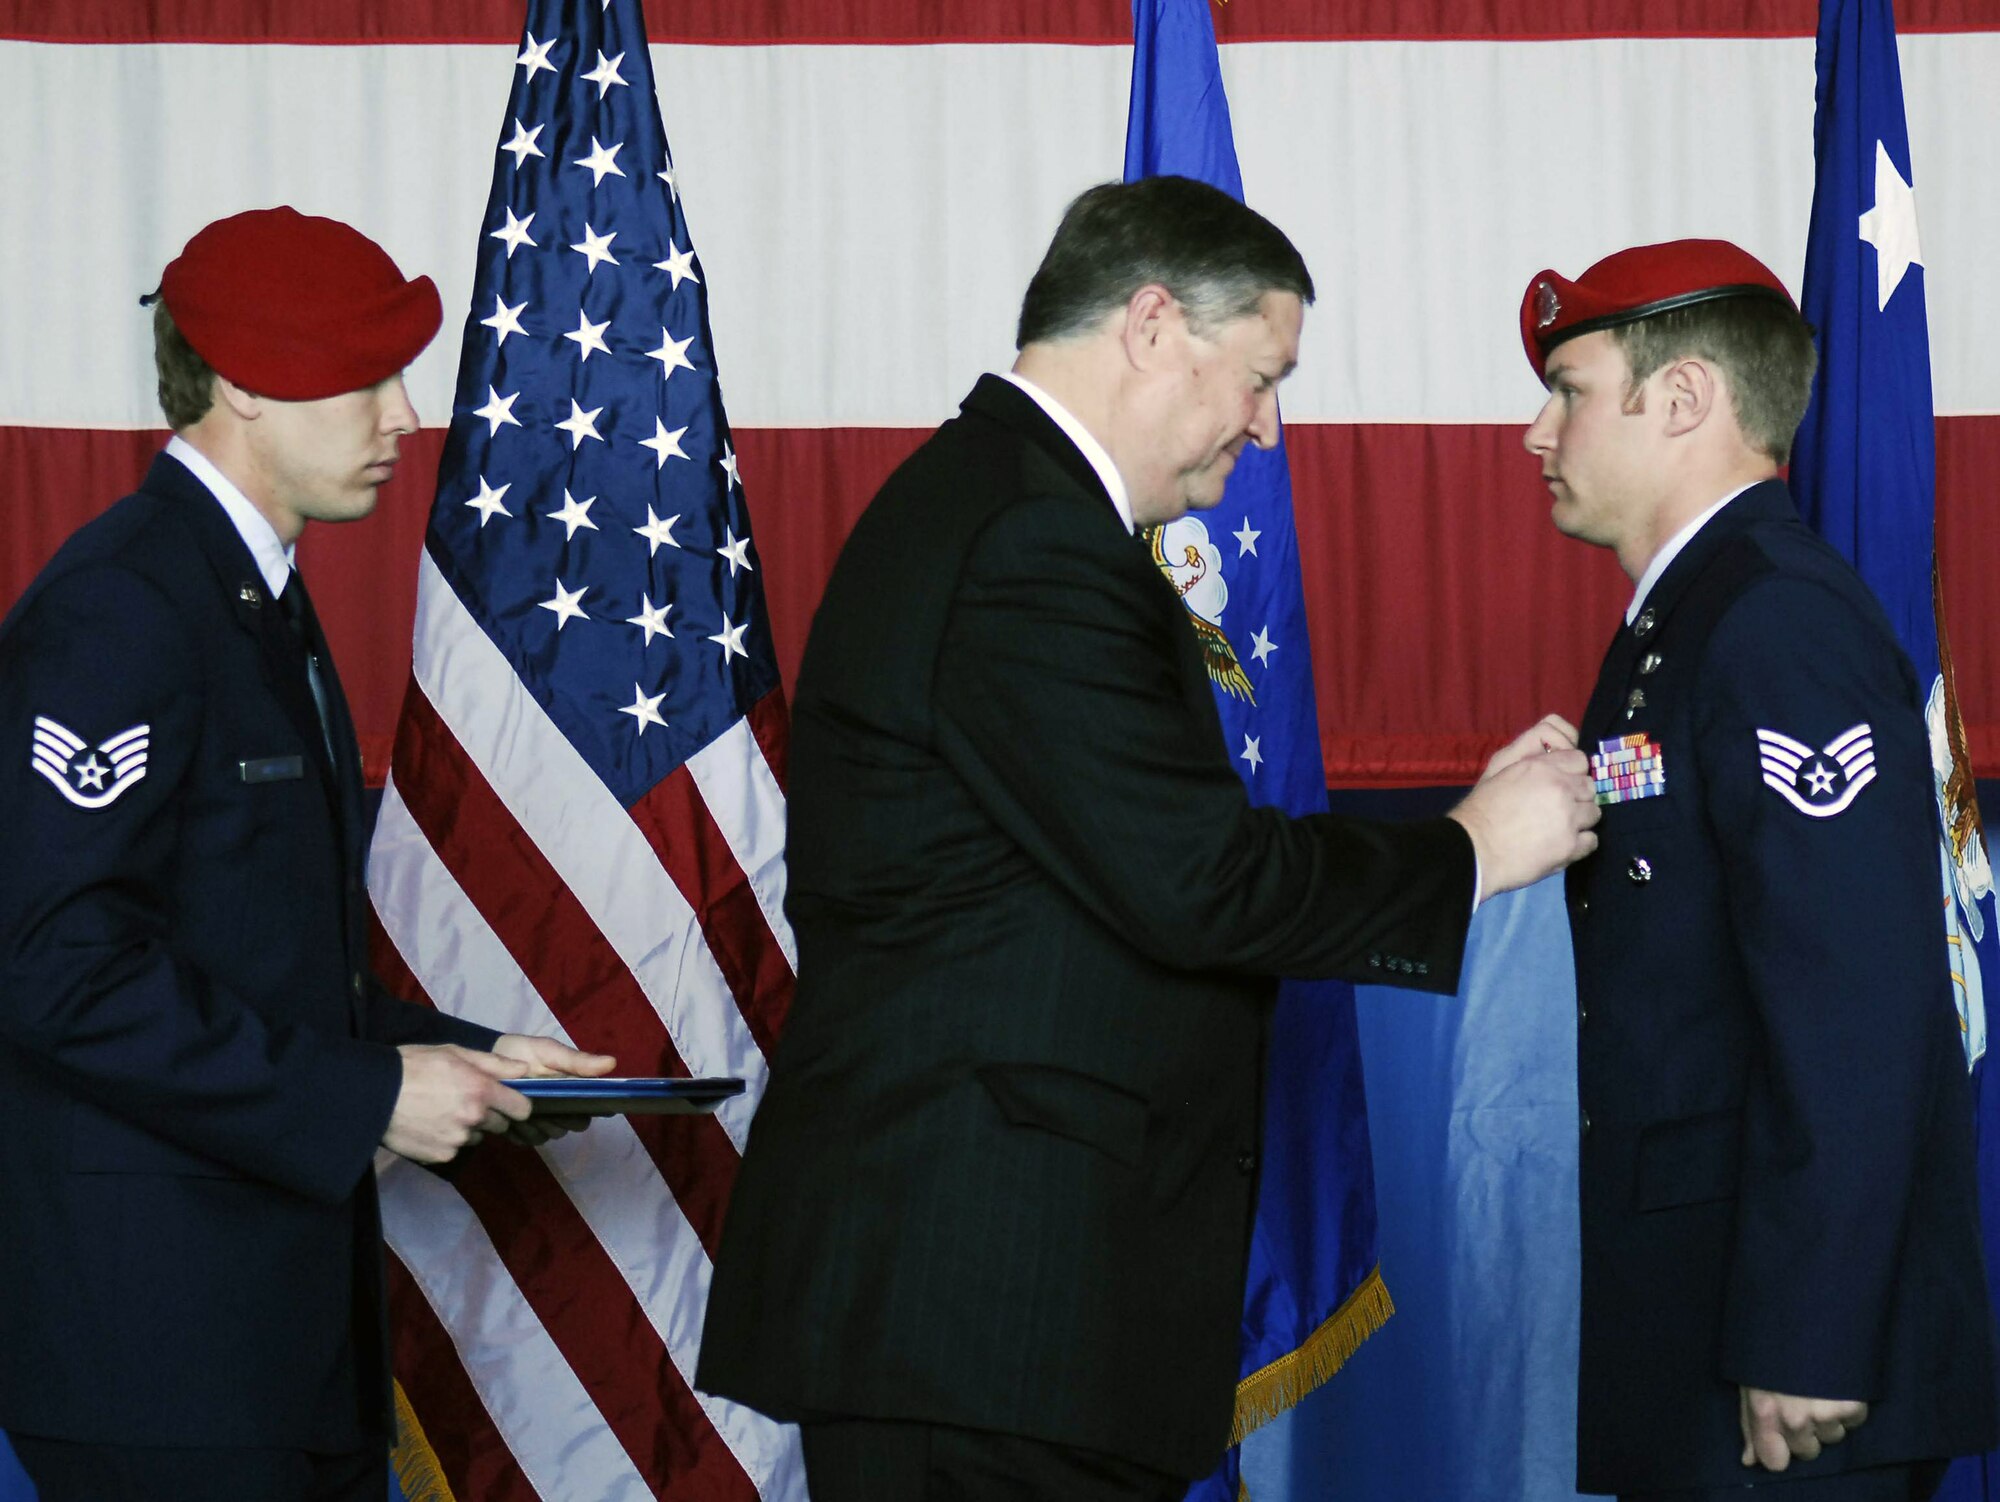 Secretary of the Air Force Michael B. Donley presents Staff Sgt. Zachary Rhyner the Air Force Cross March 10 at Pope Air Force Base, N.C. Sergeant Rhyner of the 21st Special Tactics Squadron received the medal for uncommon valor during Operation Enduring Freedom for his actions during an intense 6.5-hour battle in Shok Valley, Afghanistan, April 6, 2008.  (U.S. Air Force photo)
